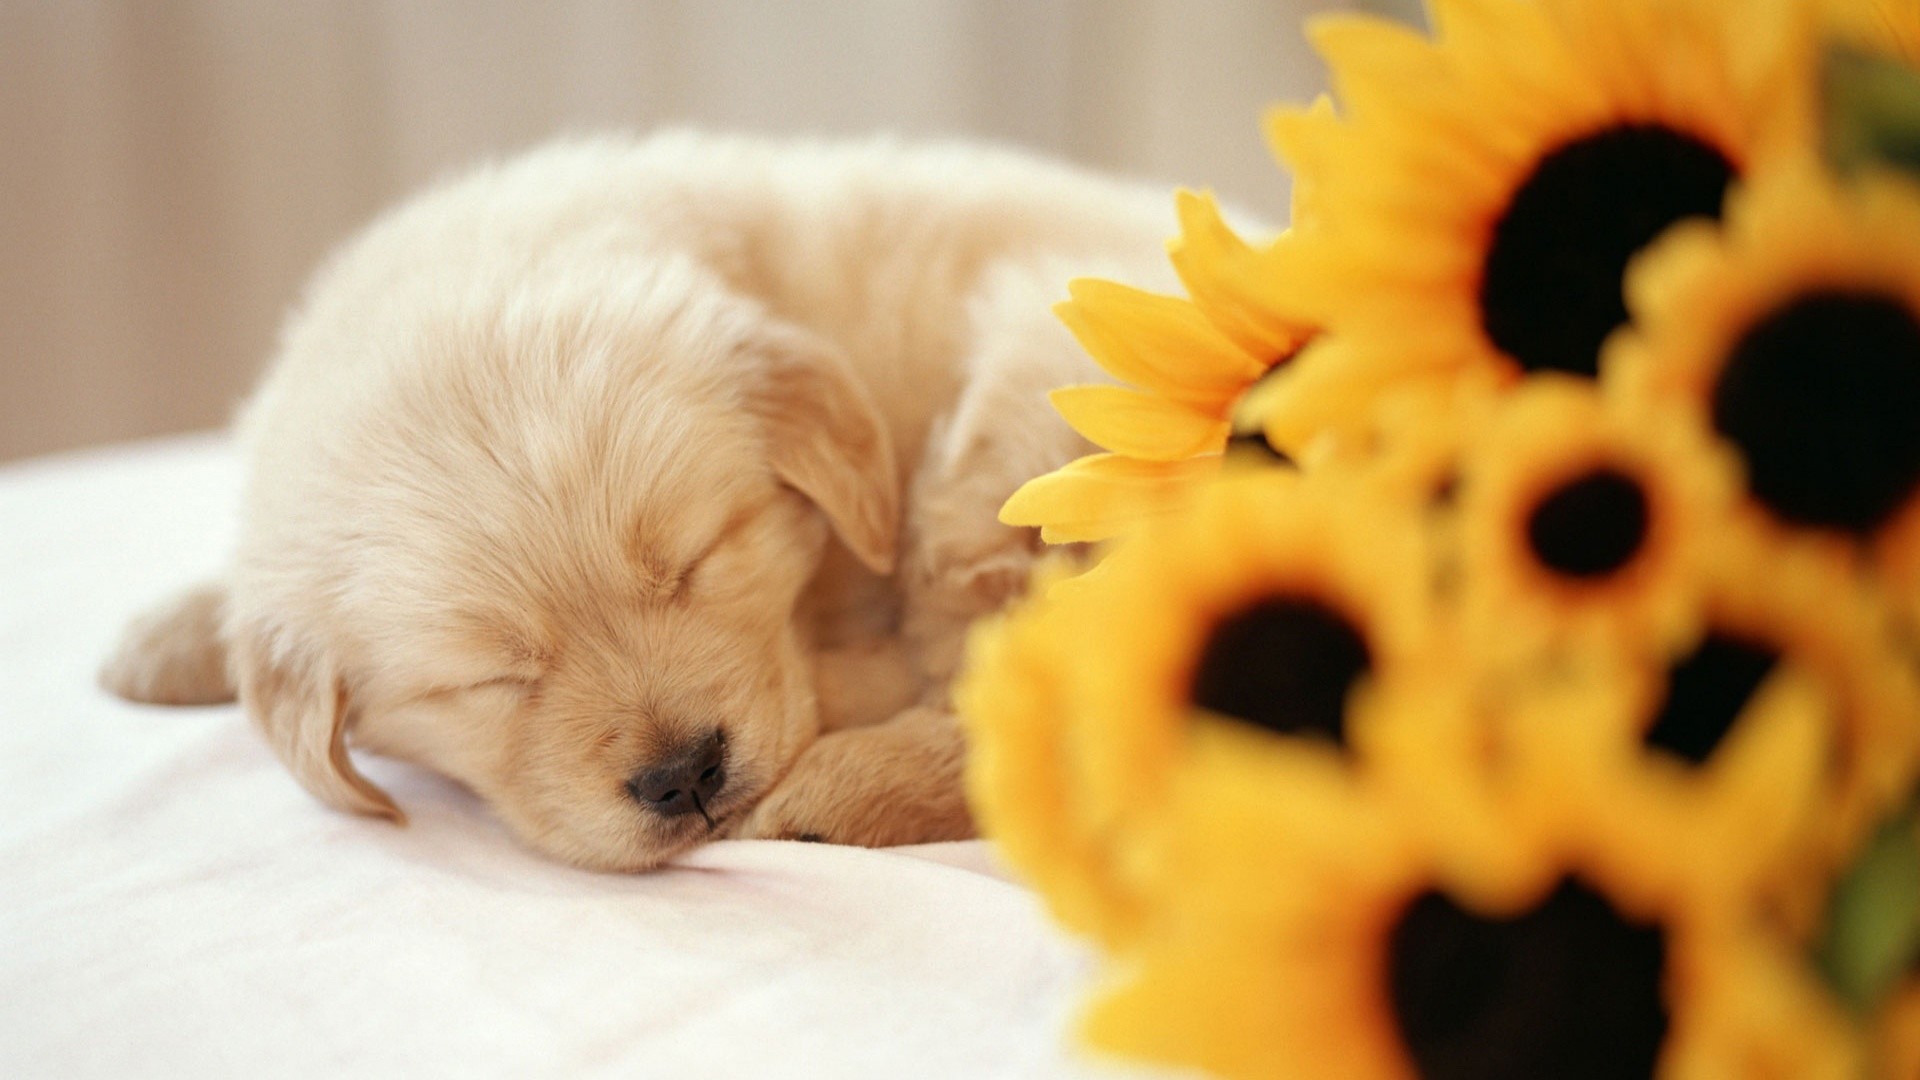 1920x1080 Sleeping Puppy Wallpapers